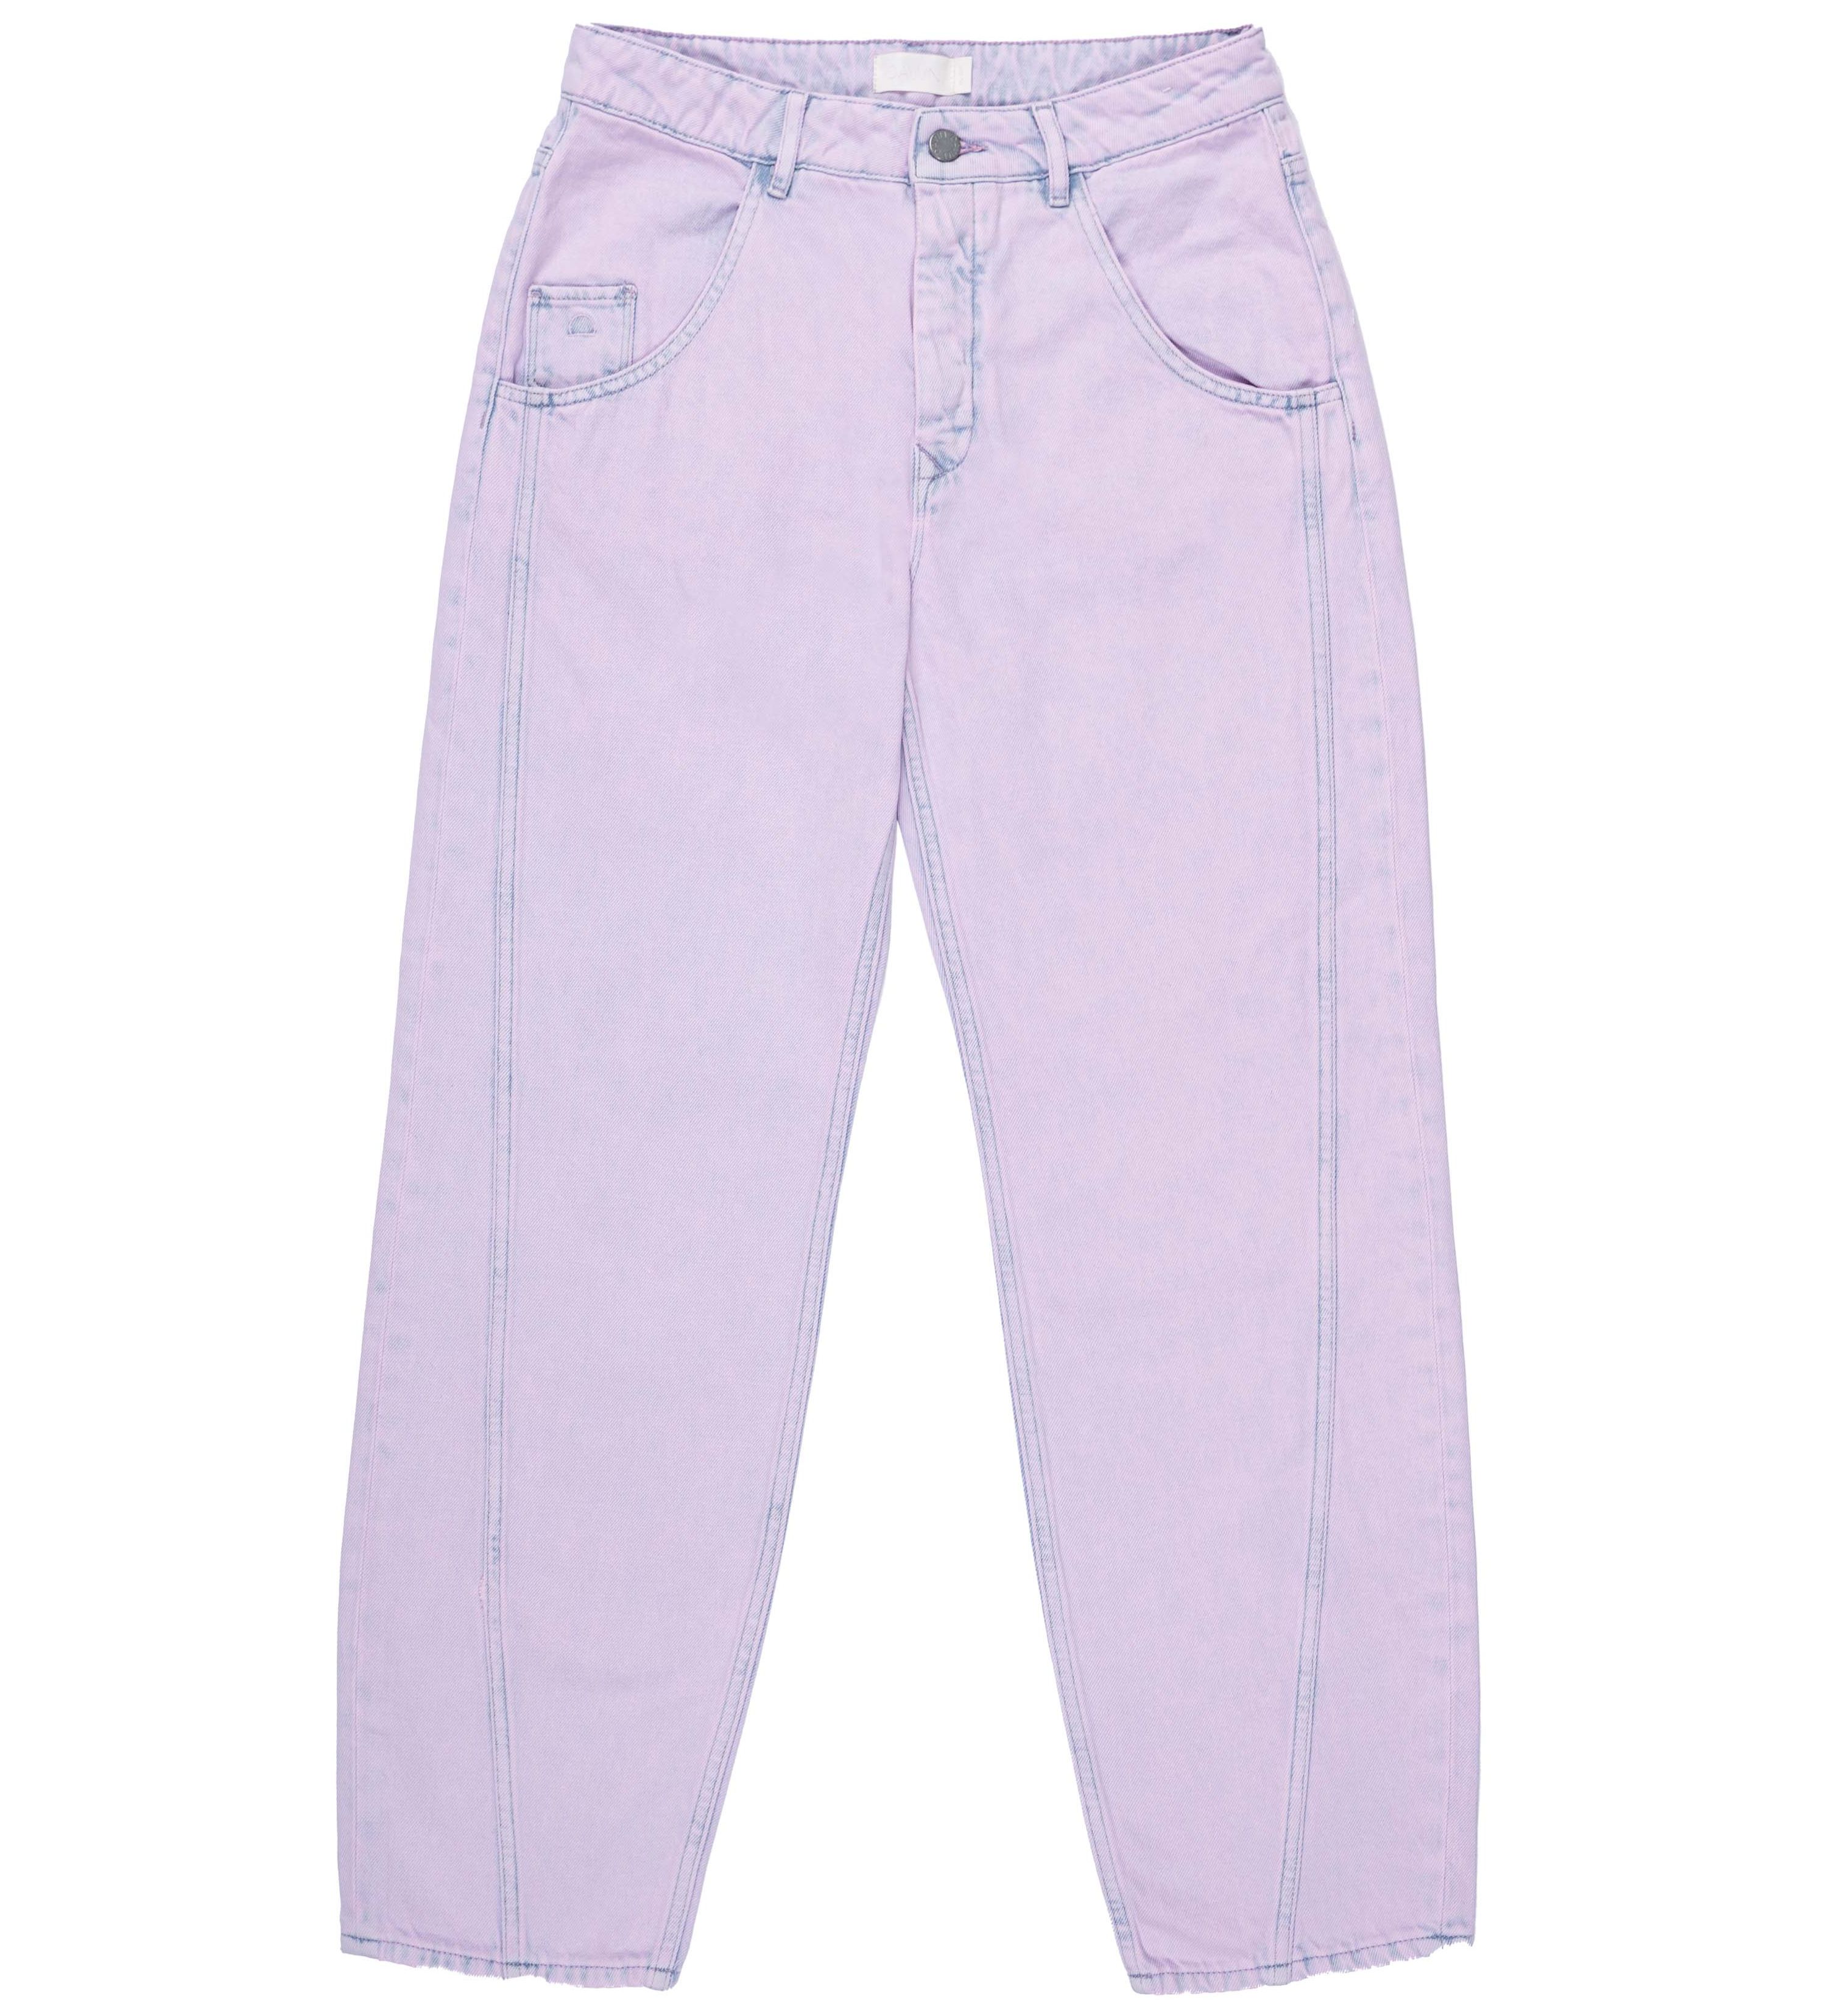 Jeans STARDUST O-Shape Non-Stretch Faded Candy